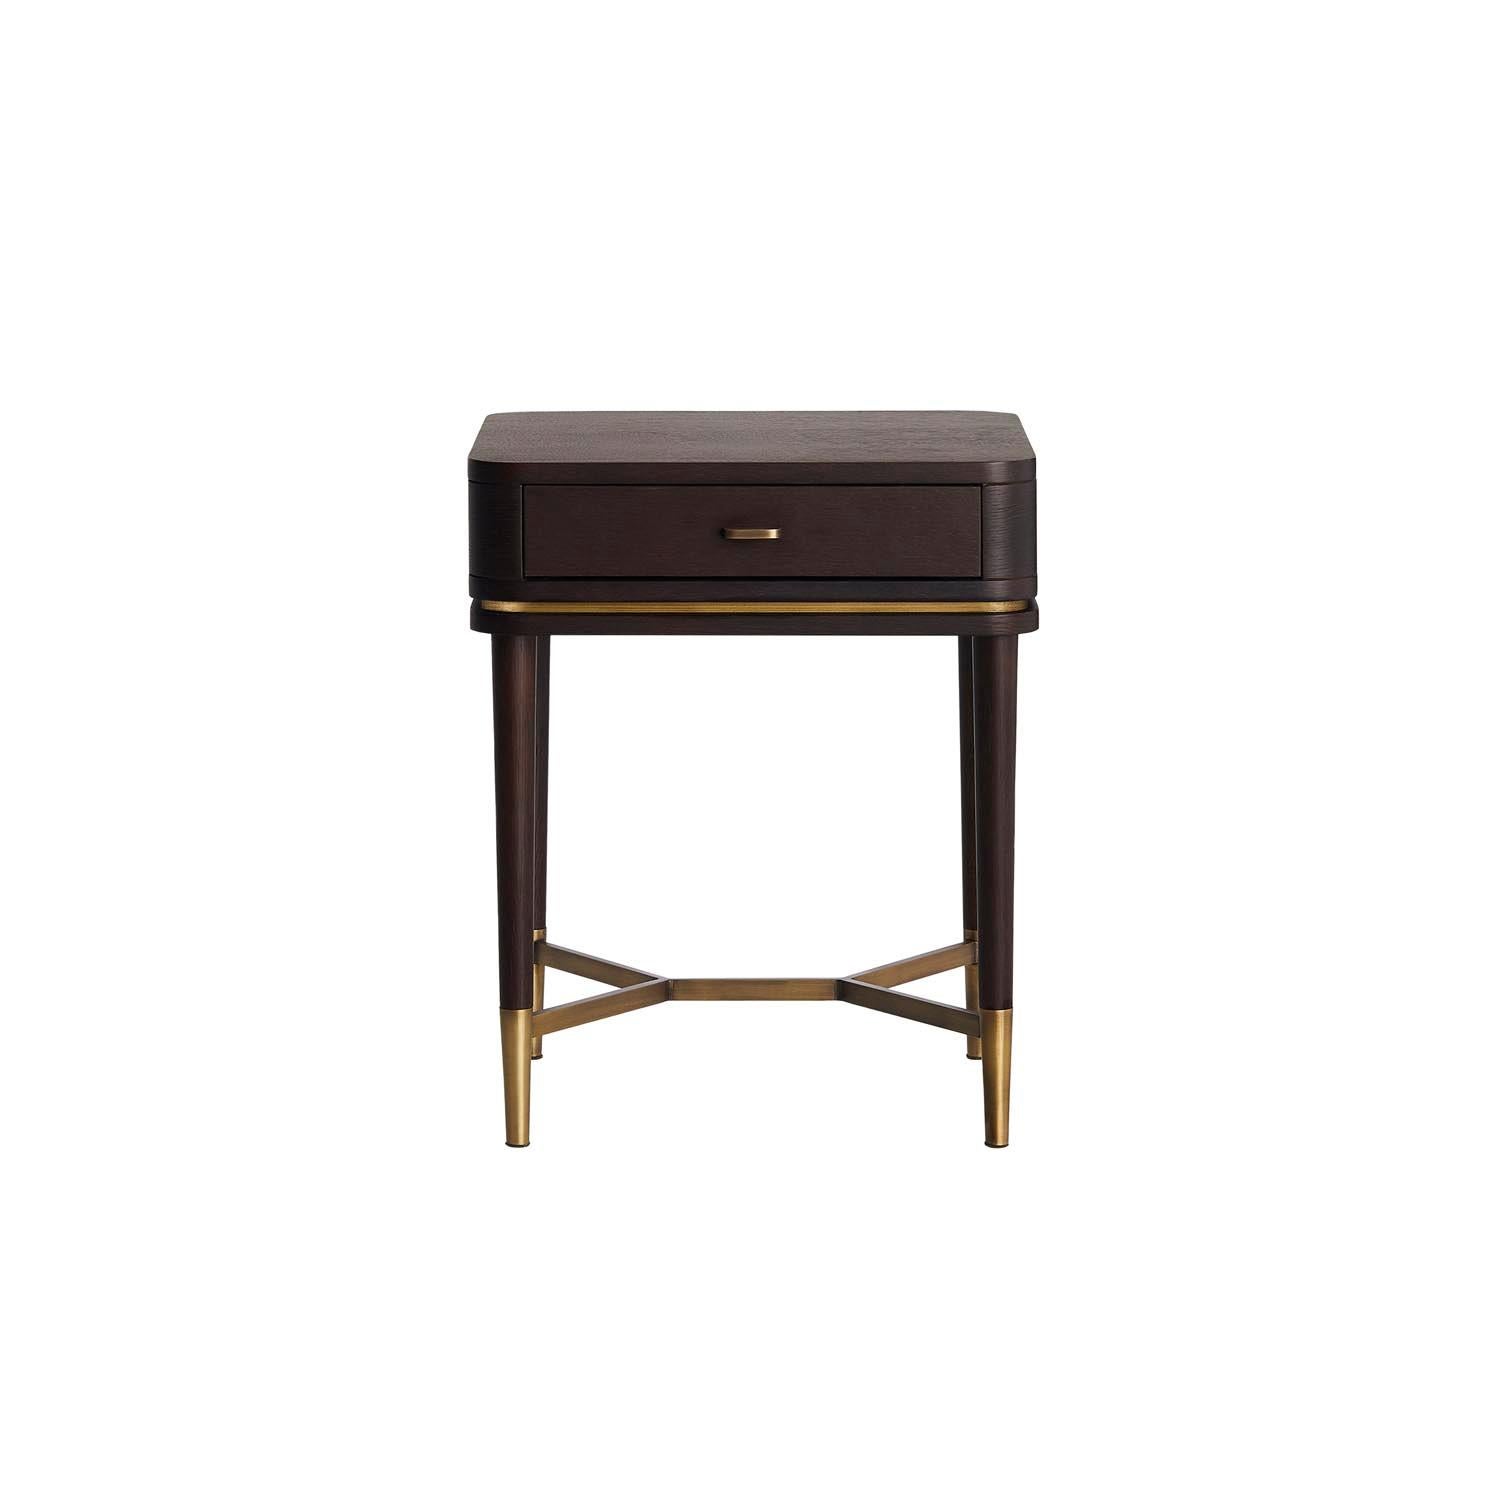 This classic style bedside table is a must have in every contemporary bedroom ambience.

Primary image: shown in matte oak veneer structure, combined with antique brass feet and handle.
